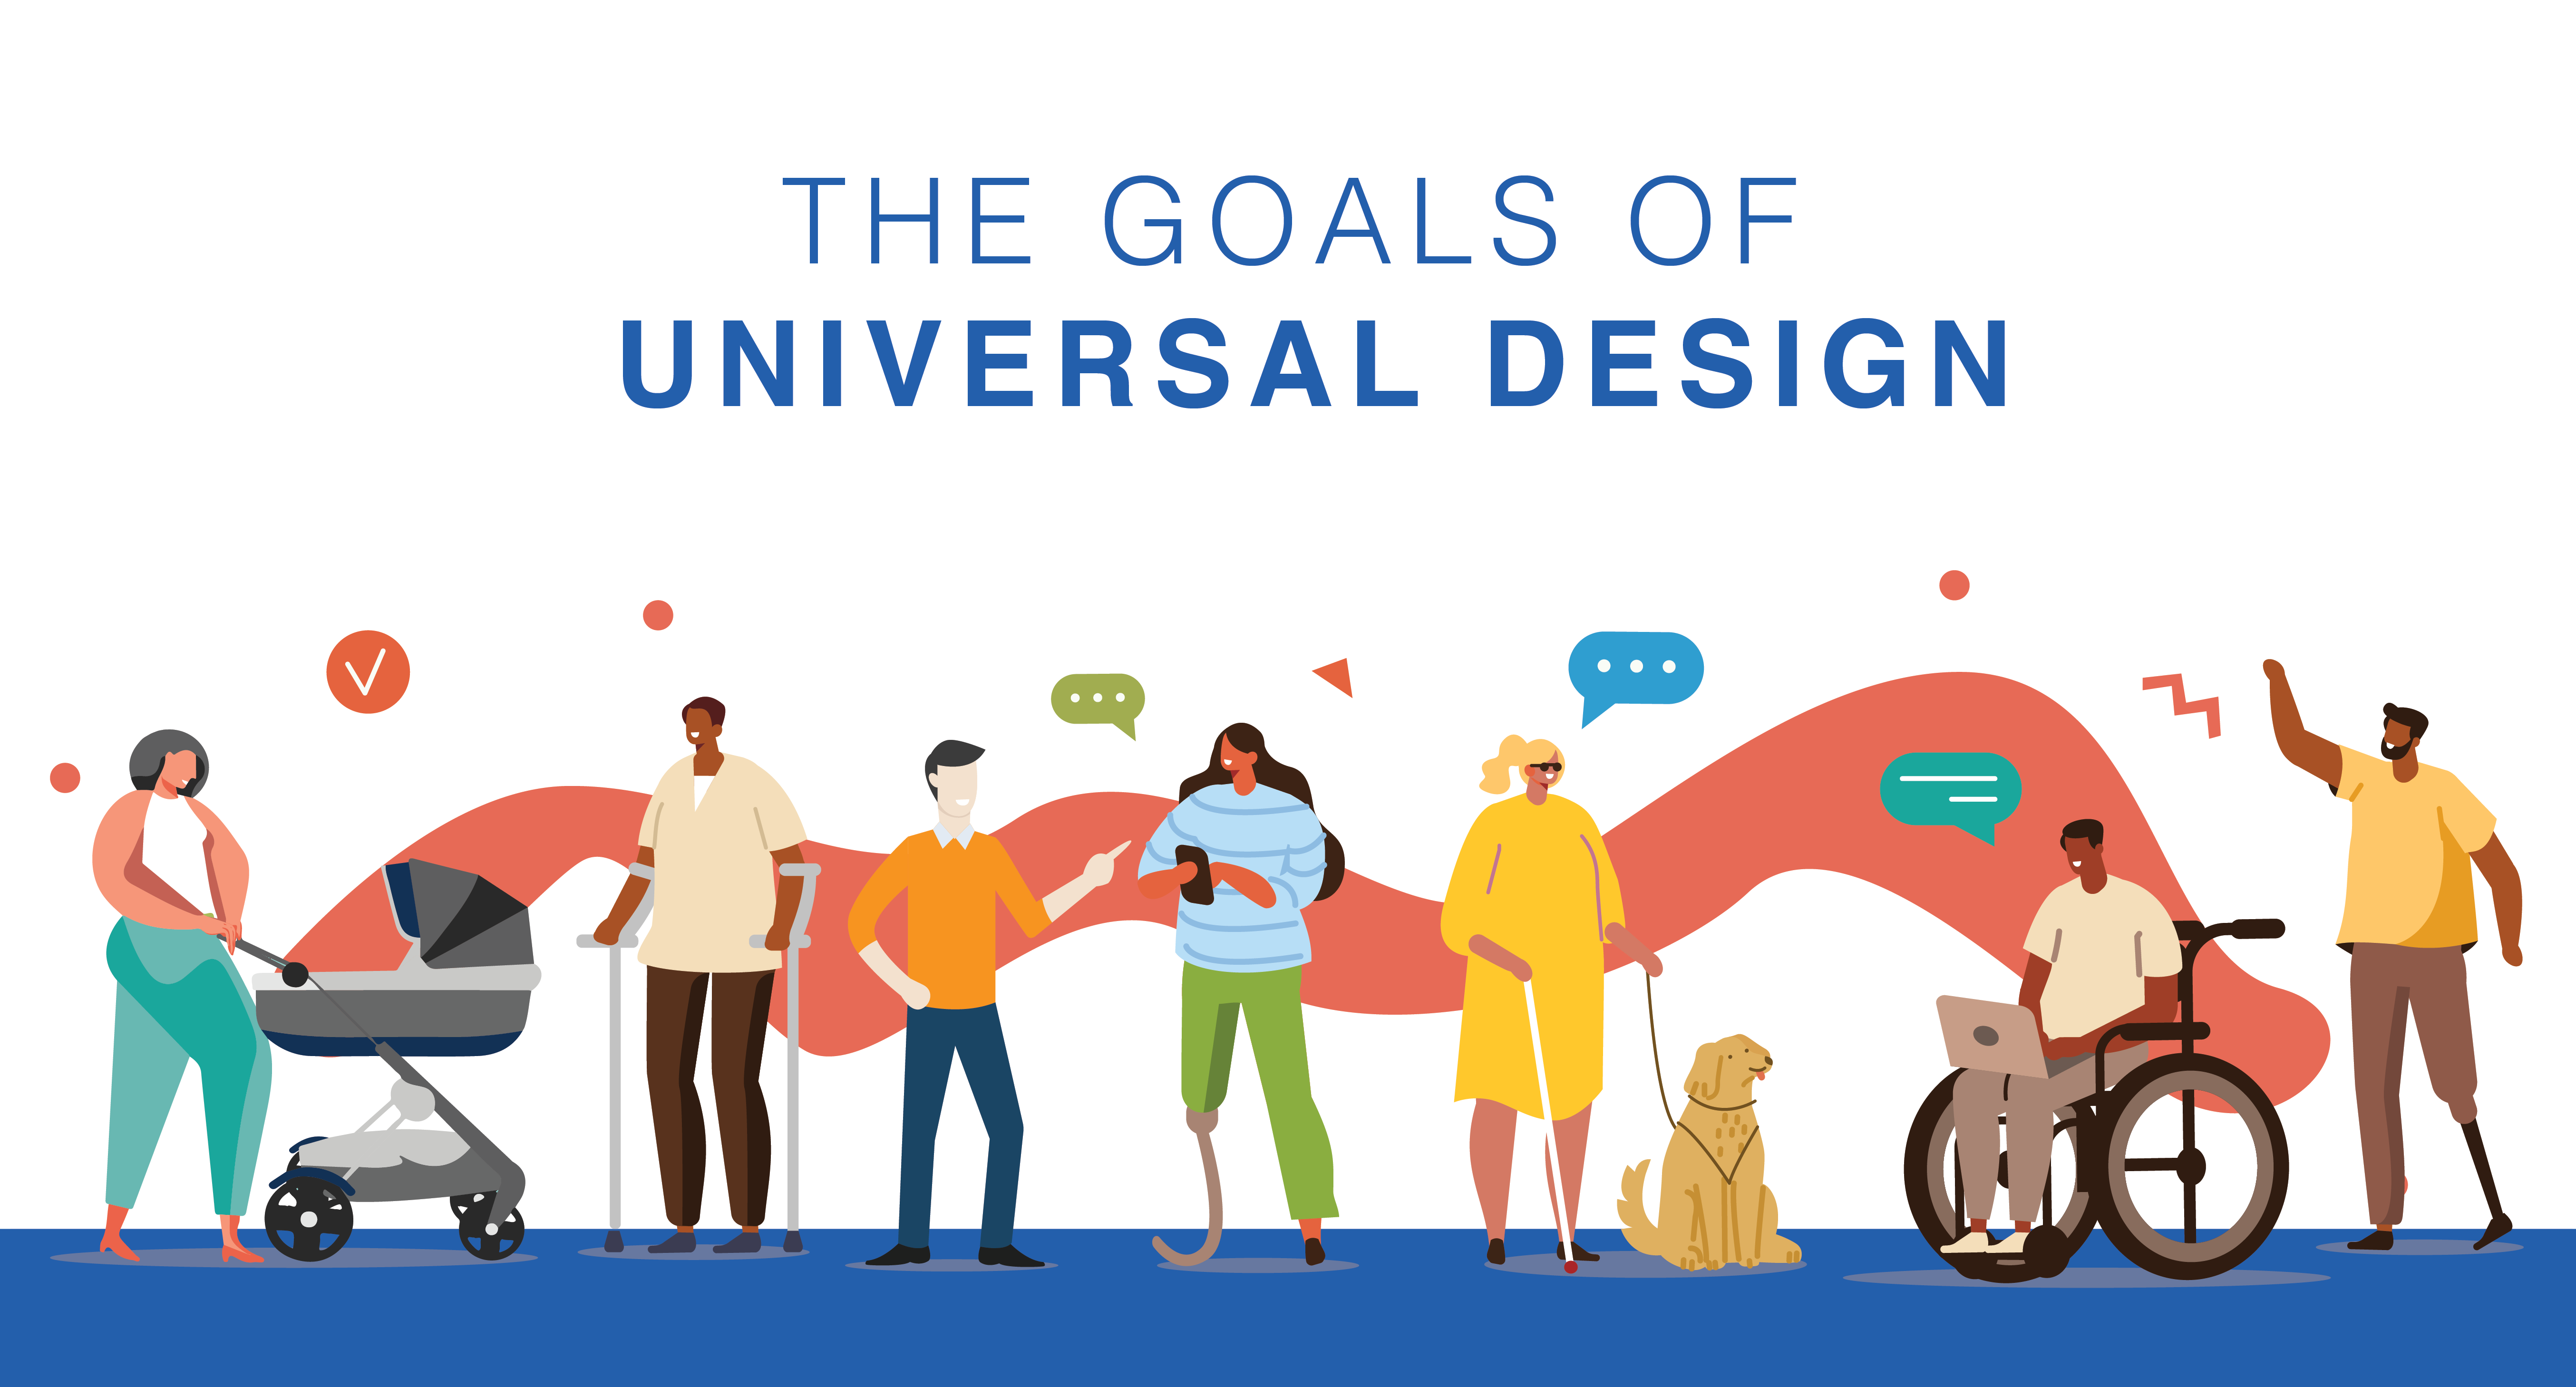 Goals of Universal Design - illustration of various types of people